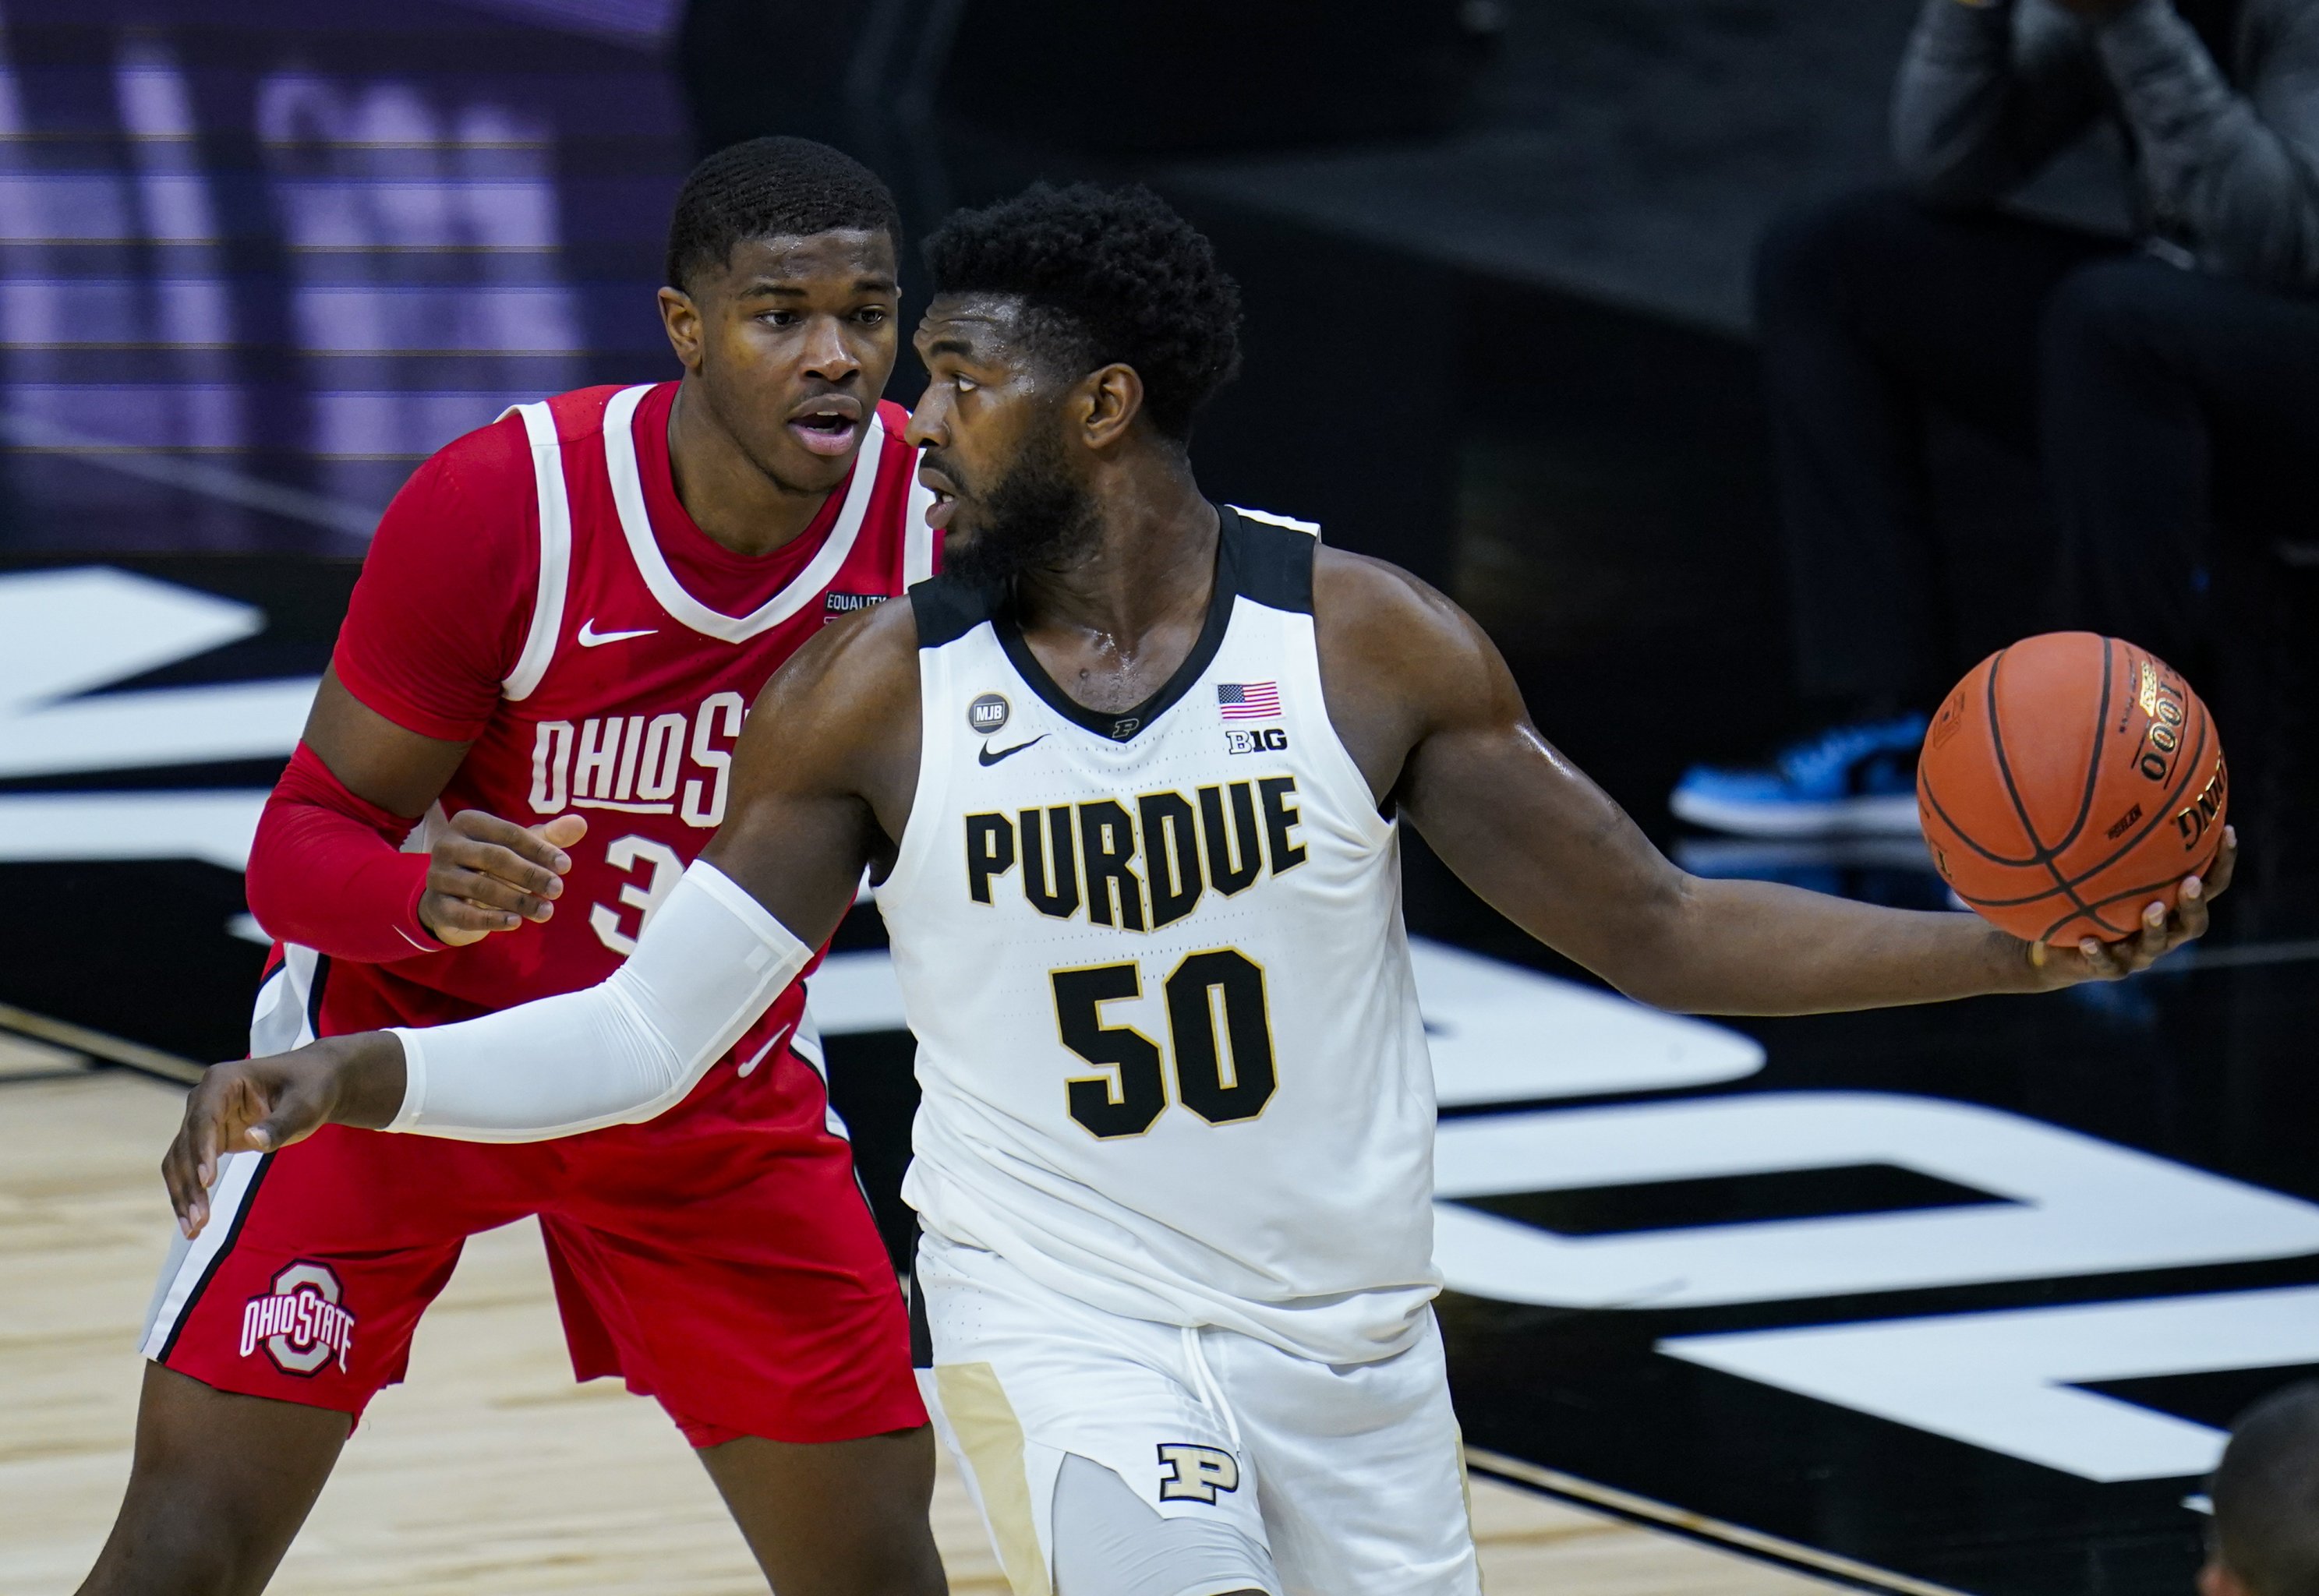 Ohio State Basketball: John Mobley Jr. commits to Buckeyes - On3